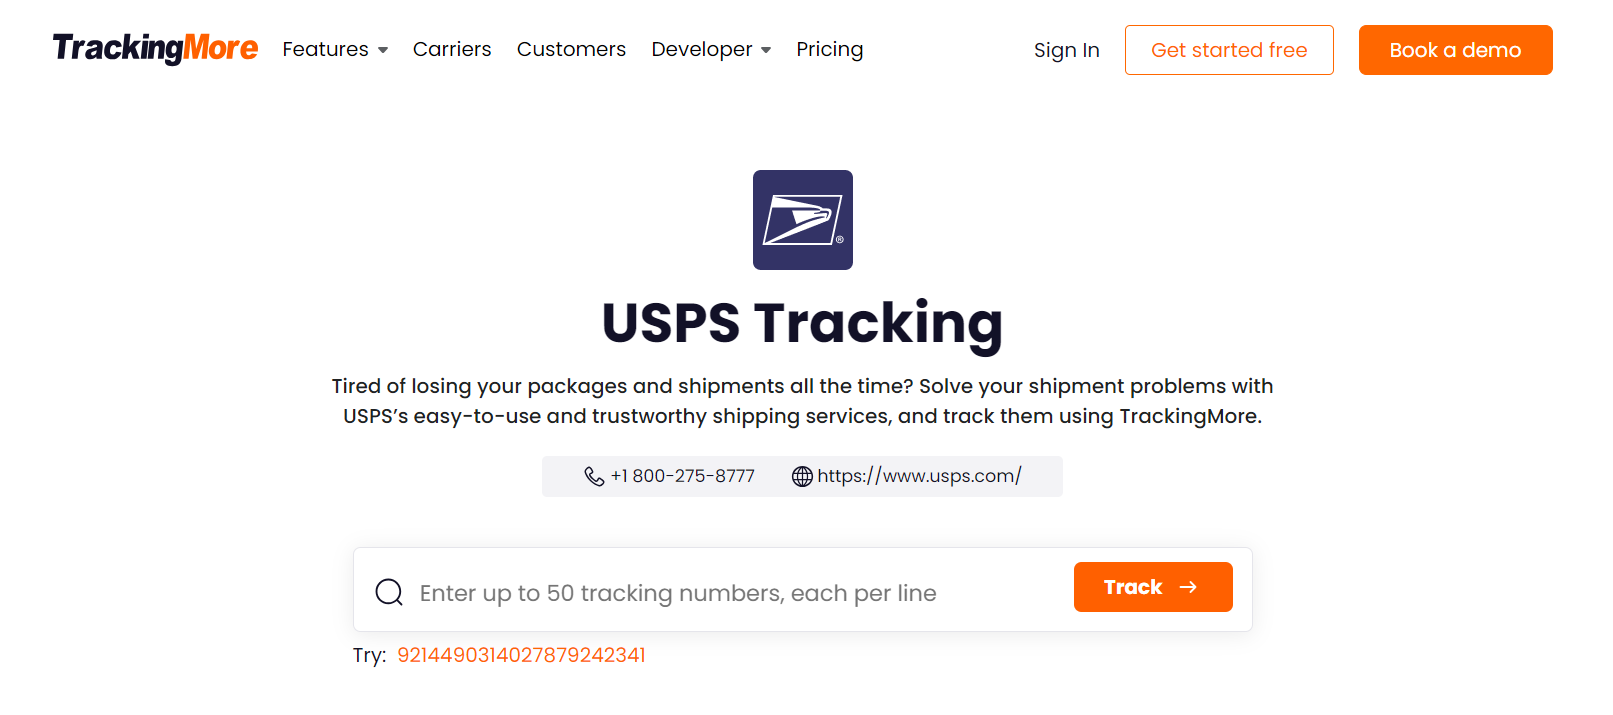 TrackingMore USPS tracking page